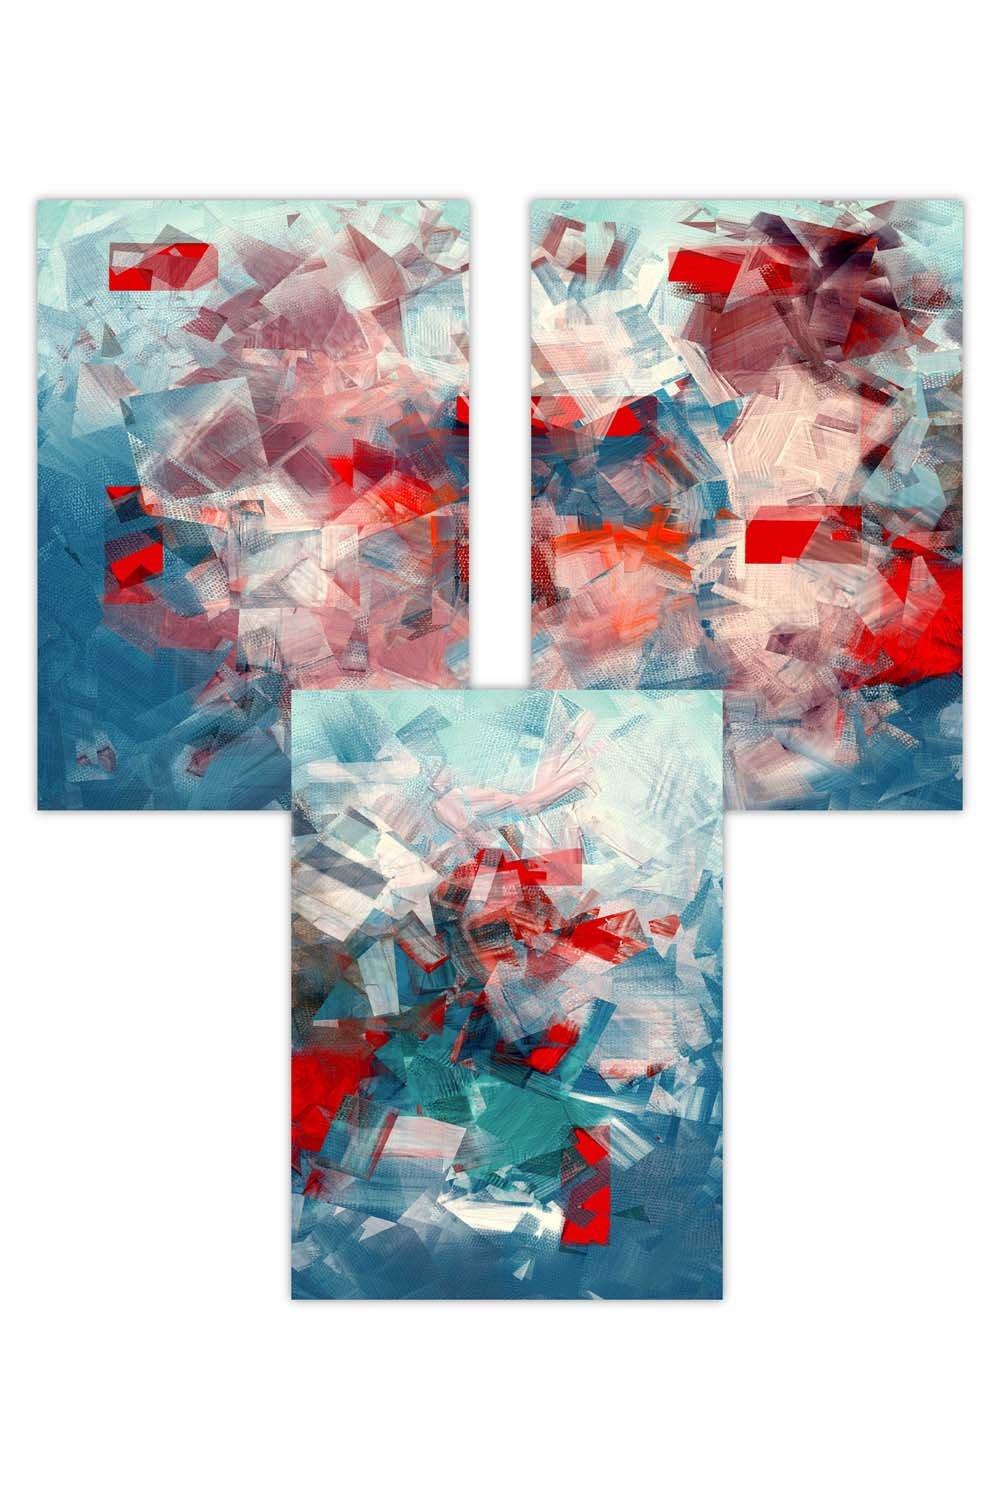 Set of 3 Geometric Abstract Squares In Red White and Blue Art Posters